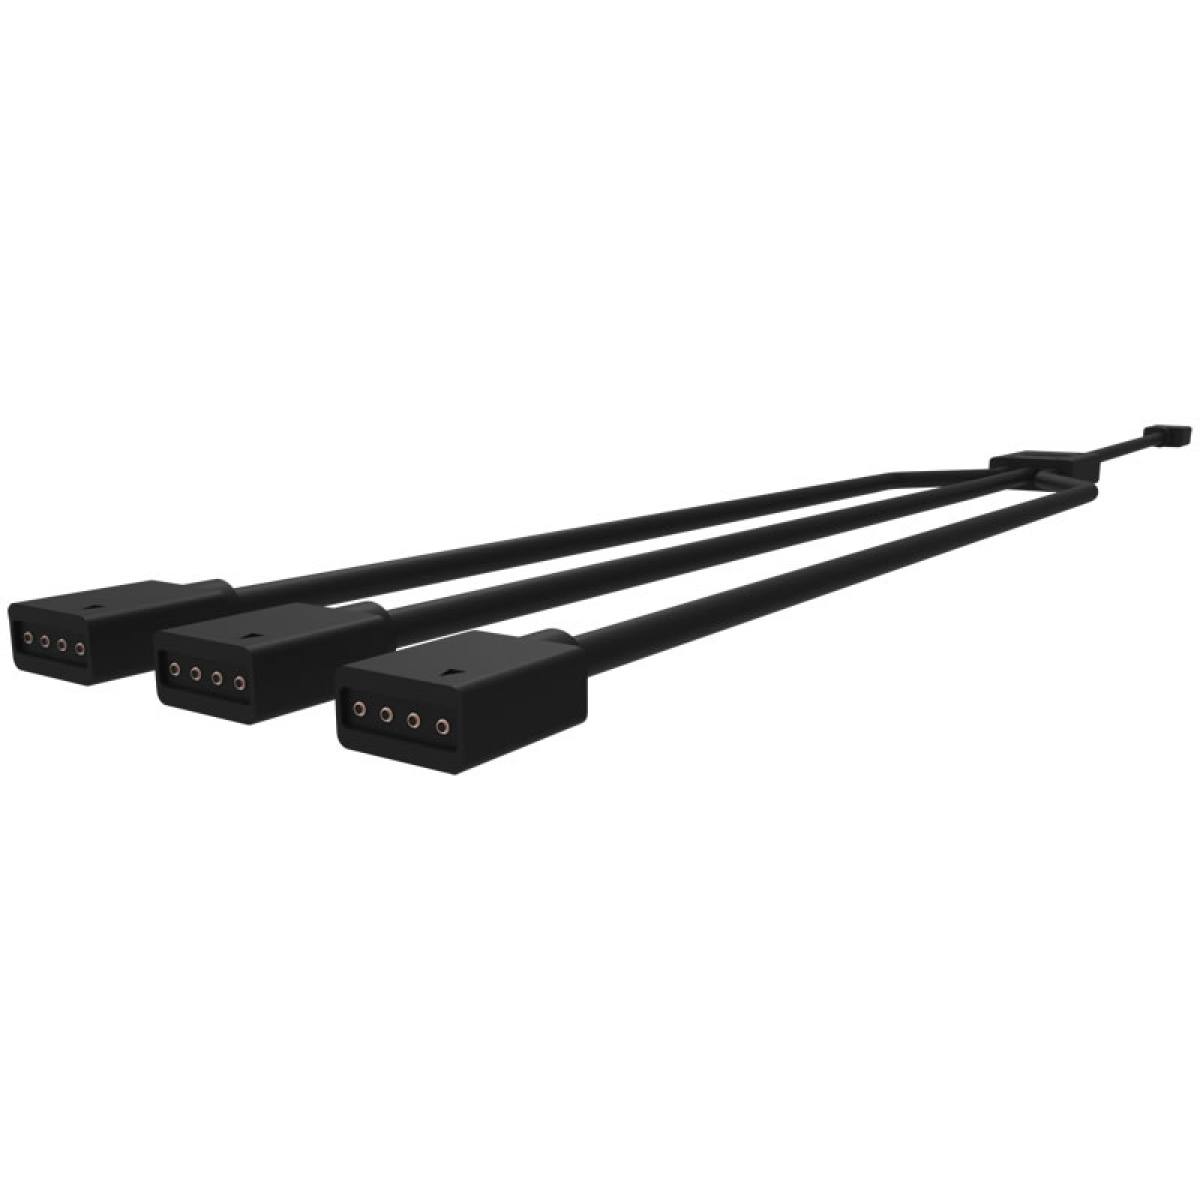 Cable 1 to 3 splitter 